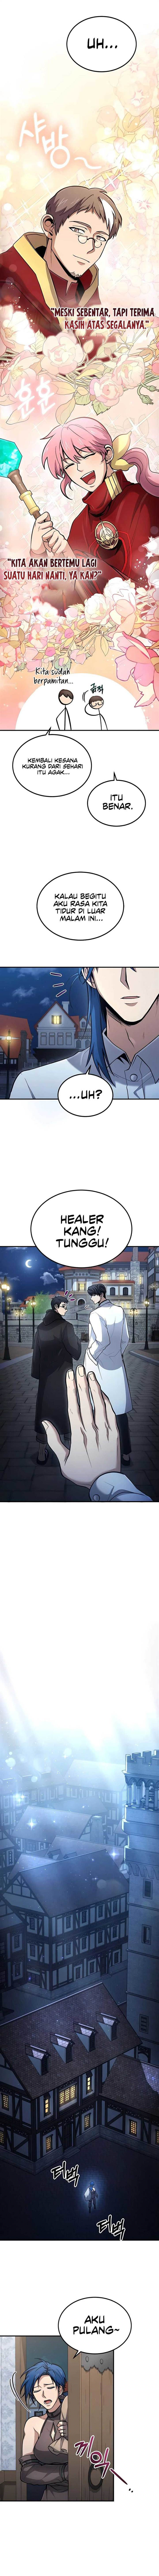 How to Live as an Illegal Healer Chapter 36